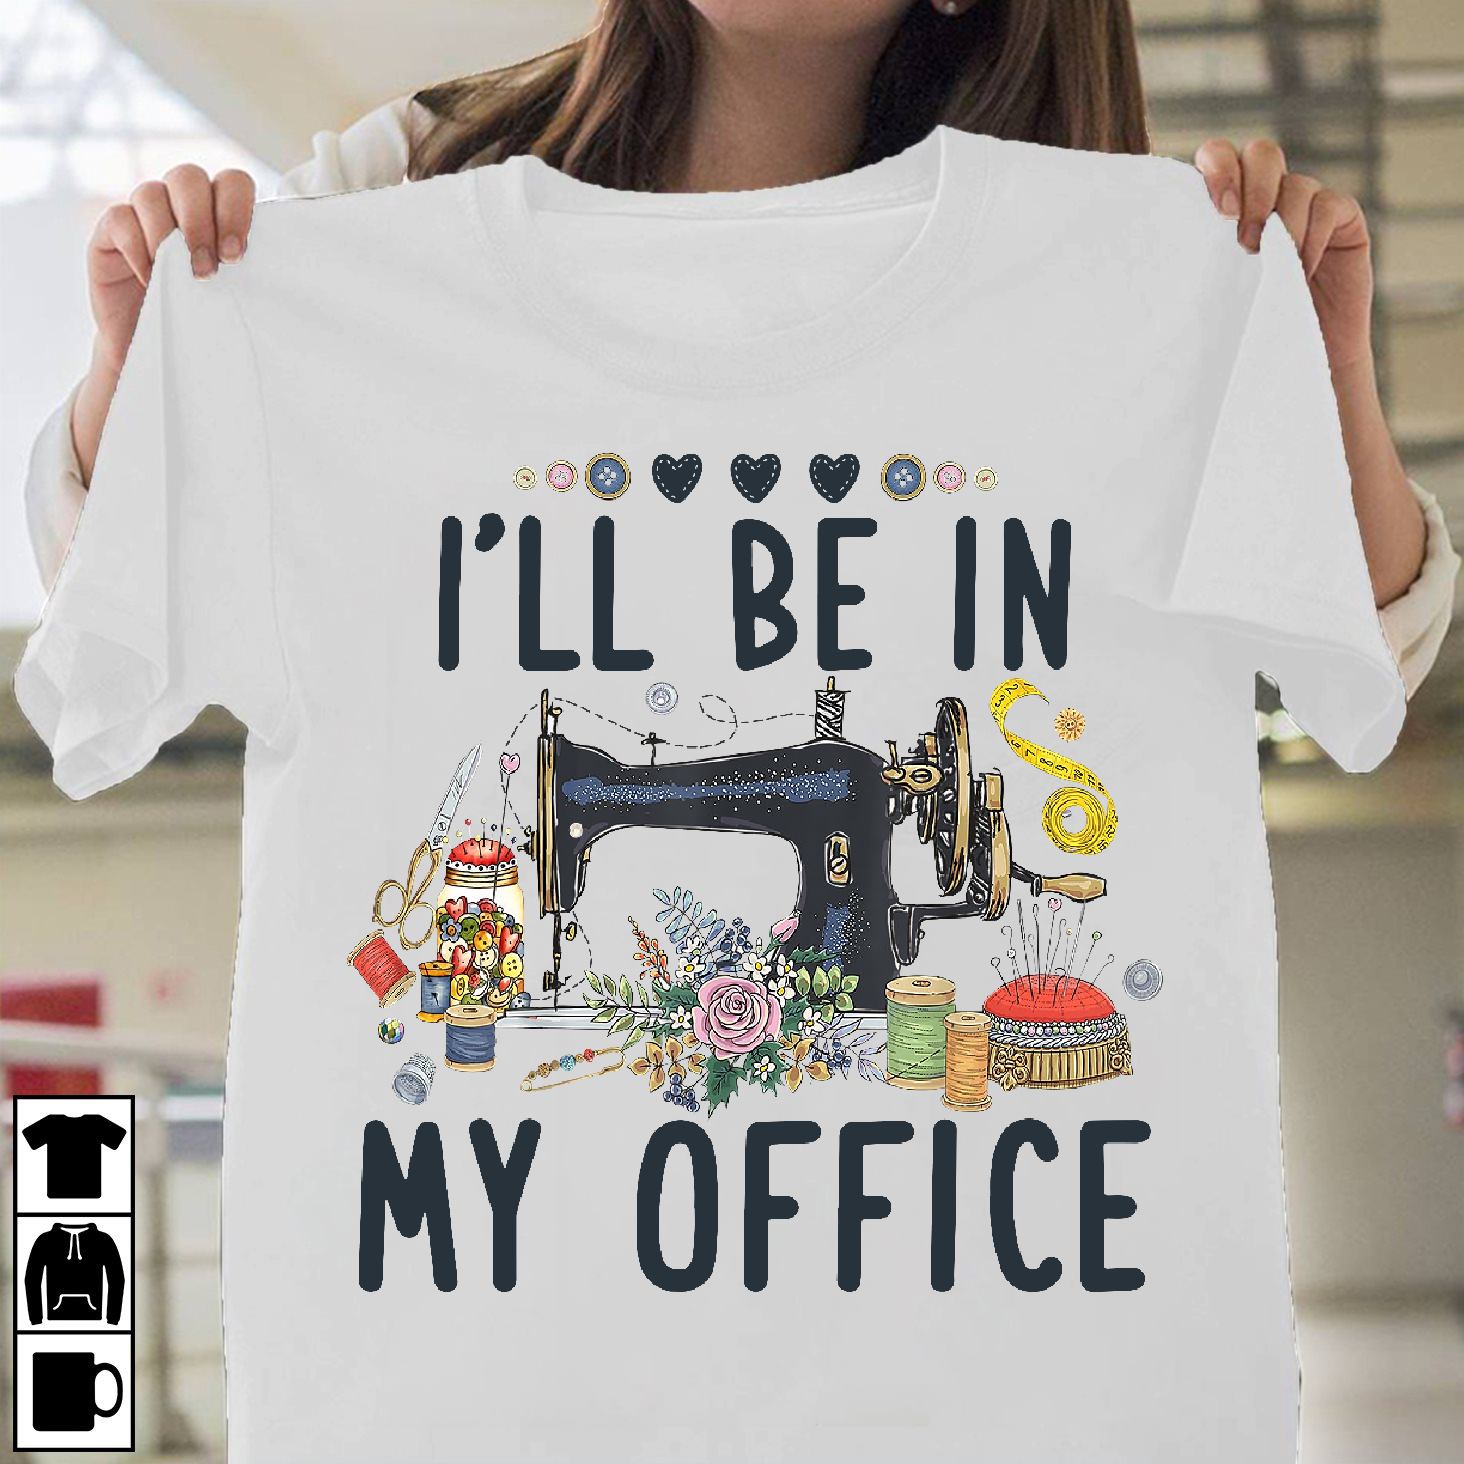 I'll be in my office - Sewing machine, sewing lover